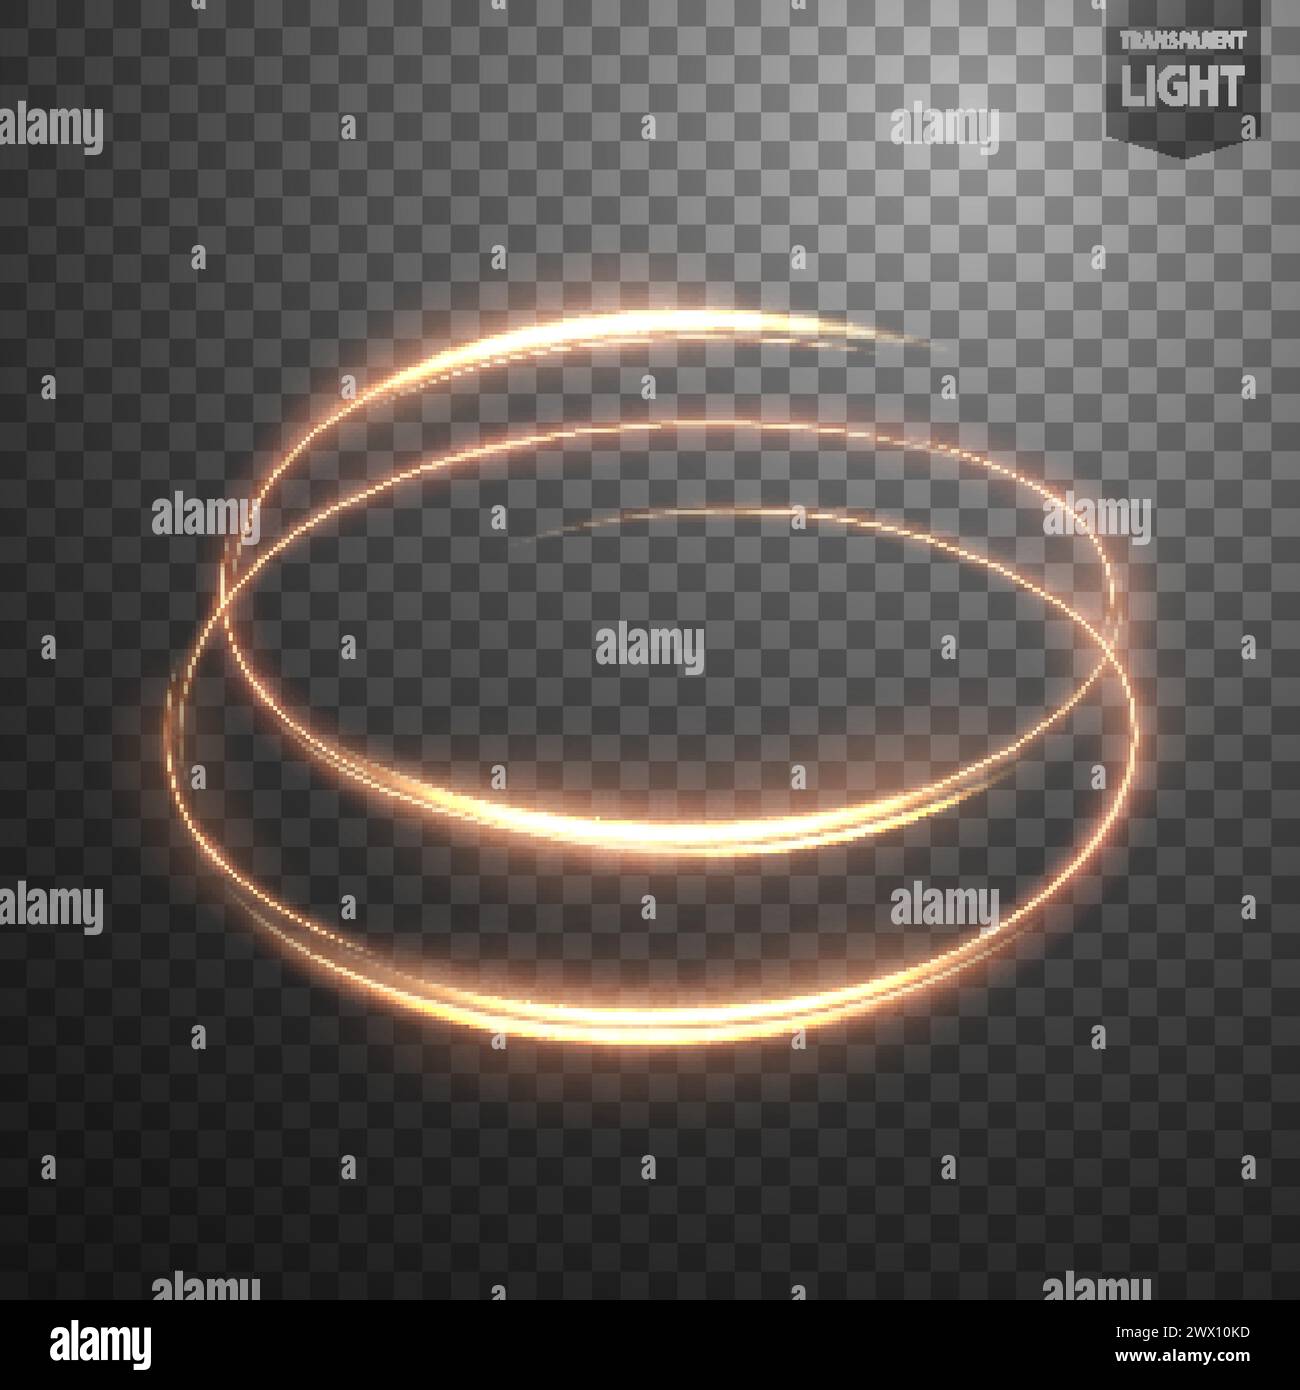 Glowing Spiral on Transparent Background, Abstract Light Speed Motion Effect, Vector Illustration Stock Vector